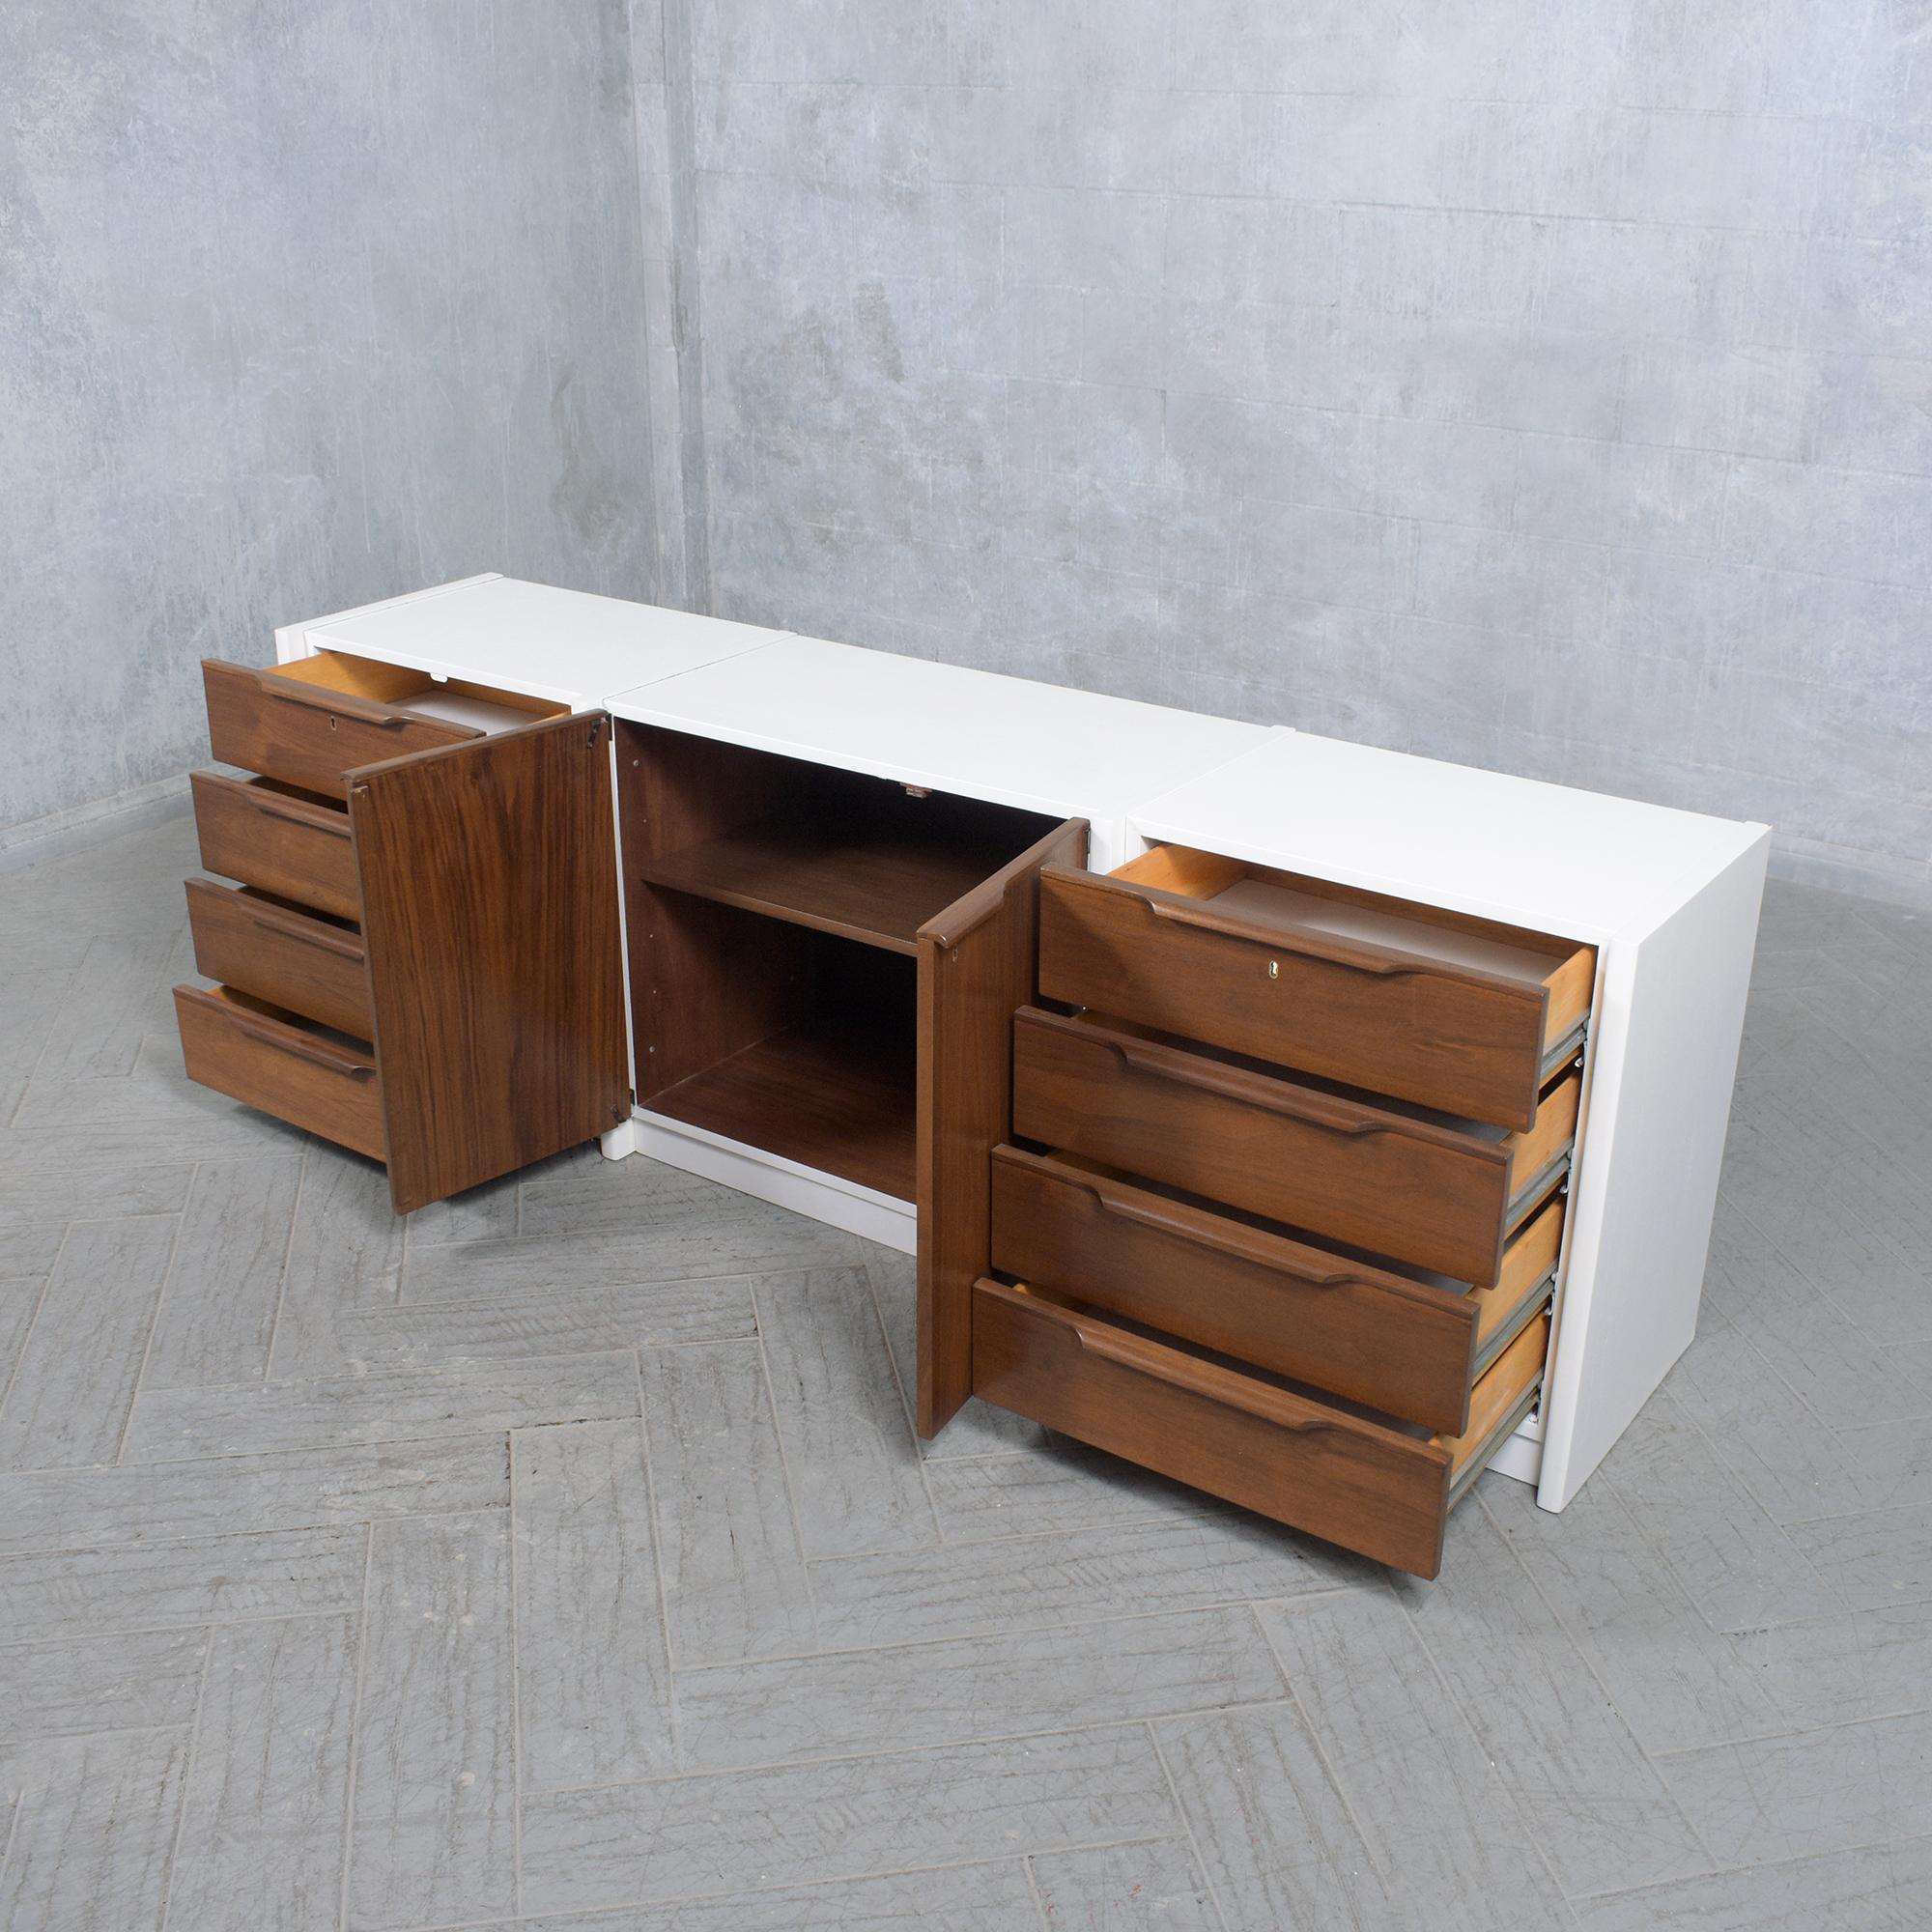 1960s Danish Executive Cabinet: Mid-Century Design and Craftsmanship In Good Condition For Sale In Los Angeles, CA